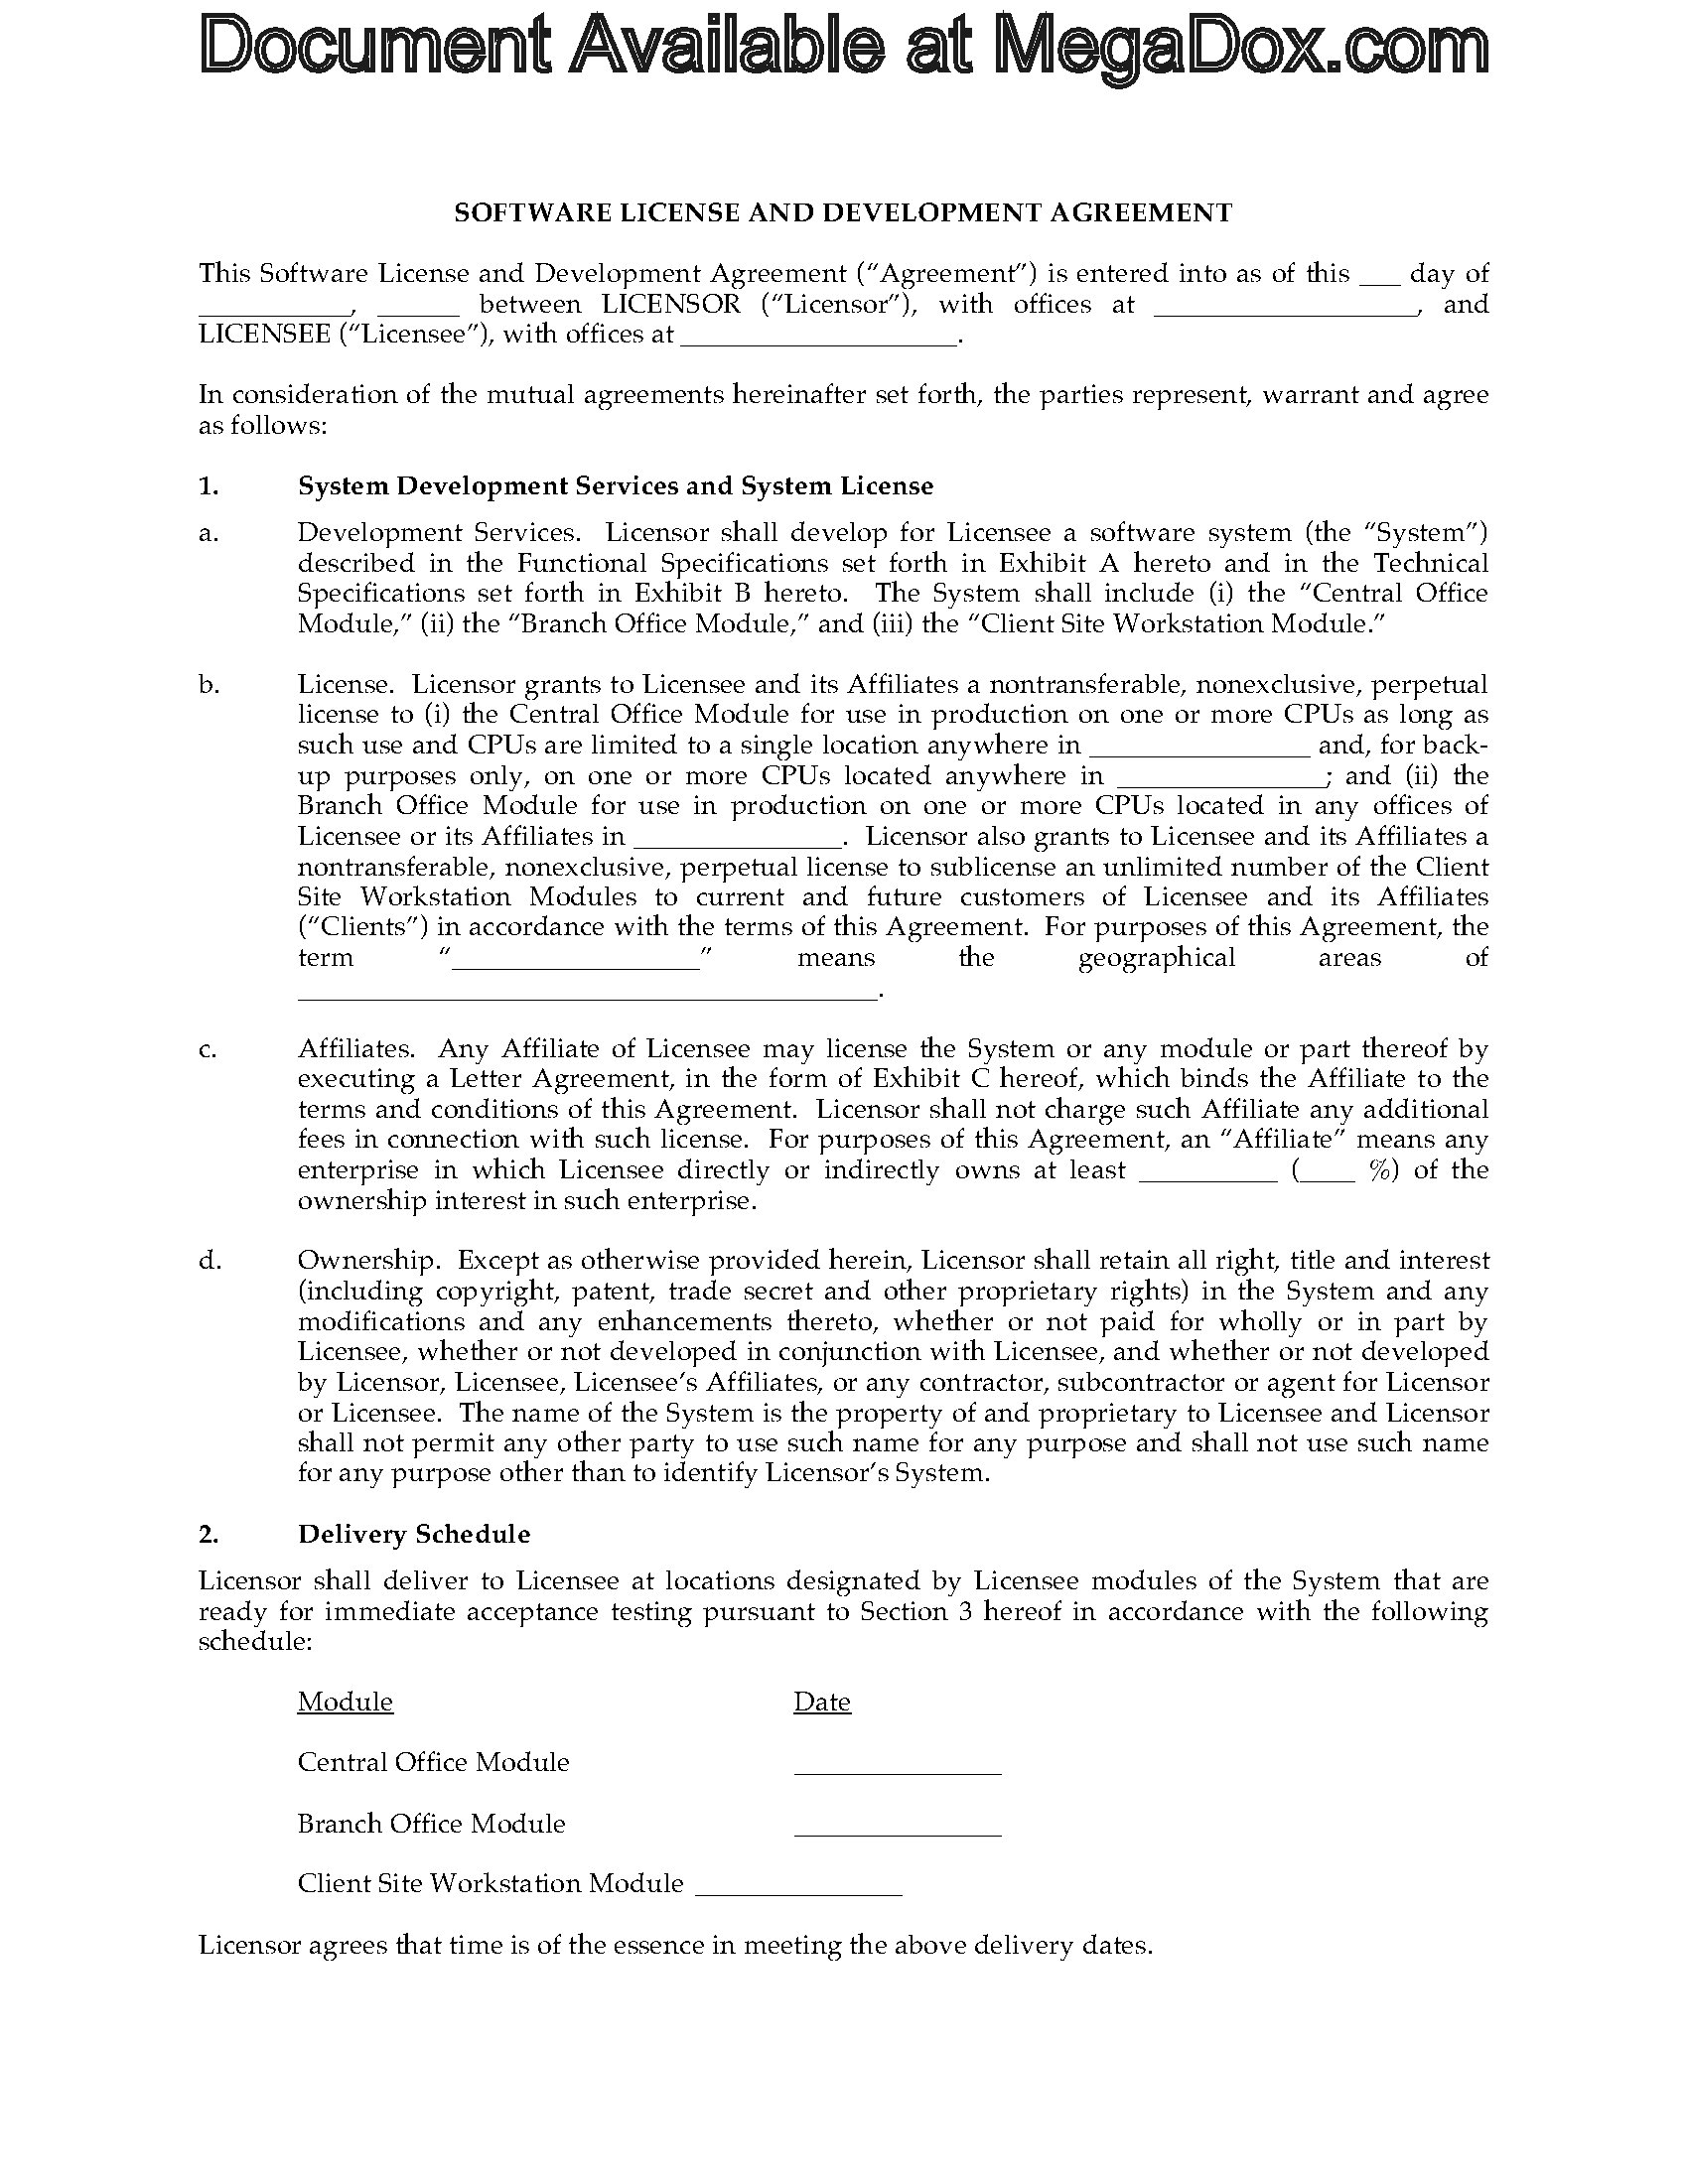 Software Development and Perpetual License Agreement Legal Forms and